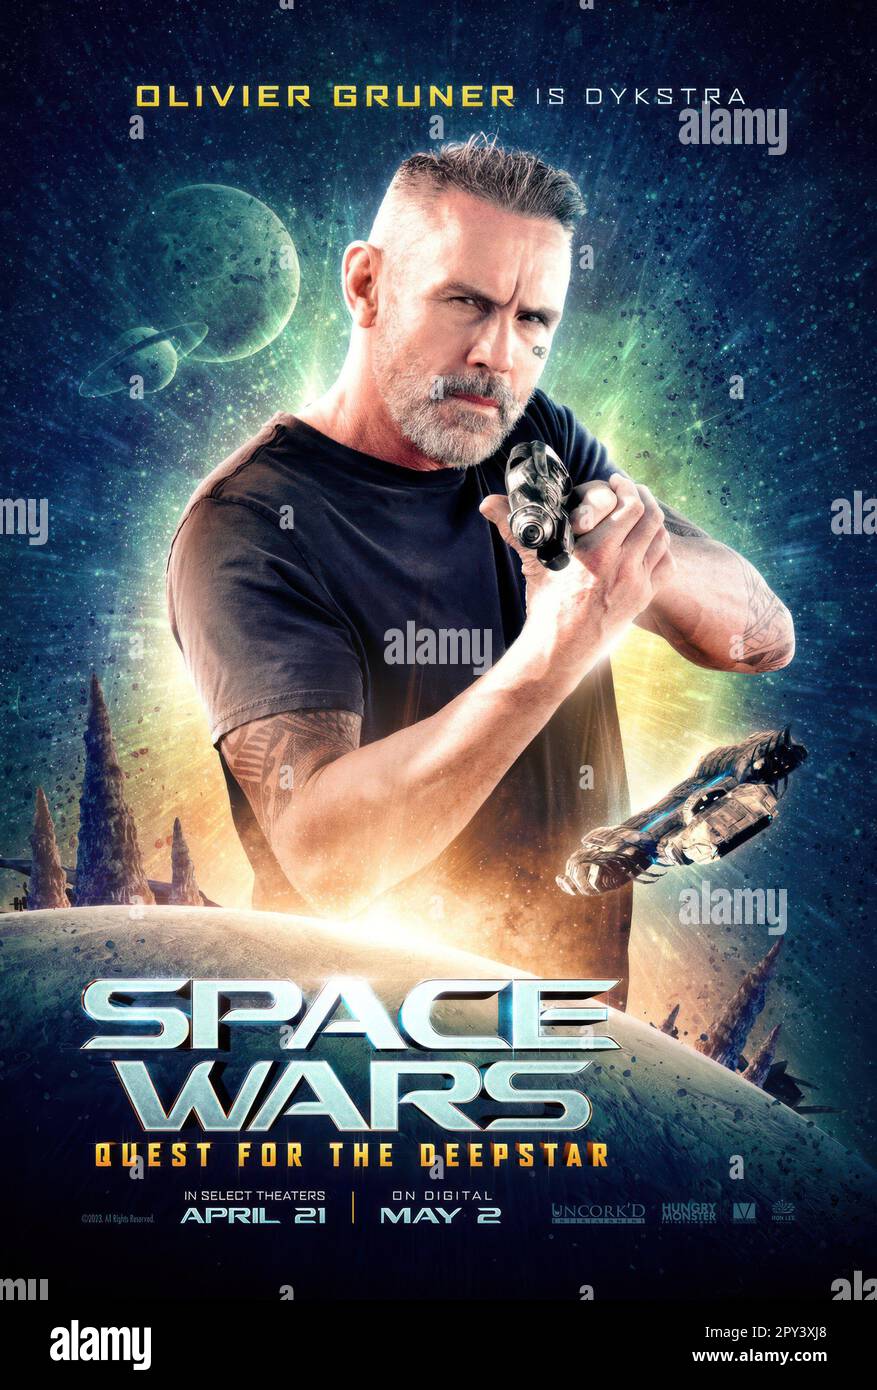 Space Wars: Quest for the Deepstar character posters